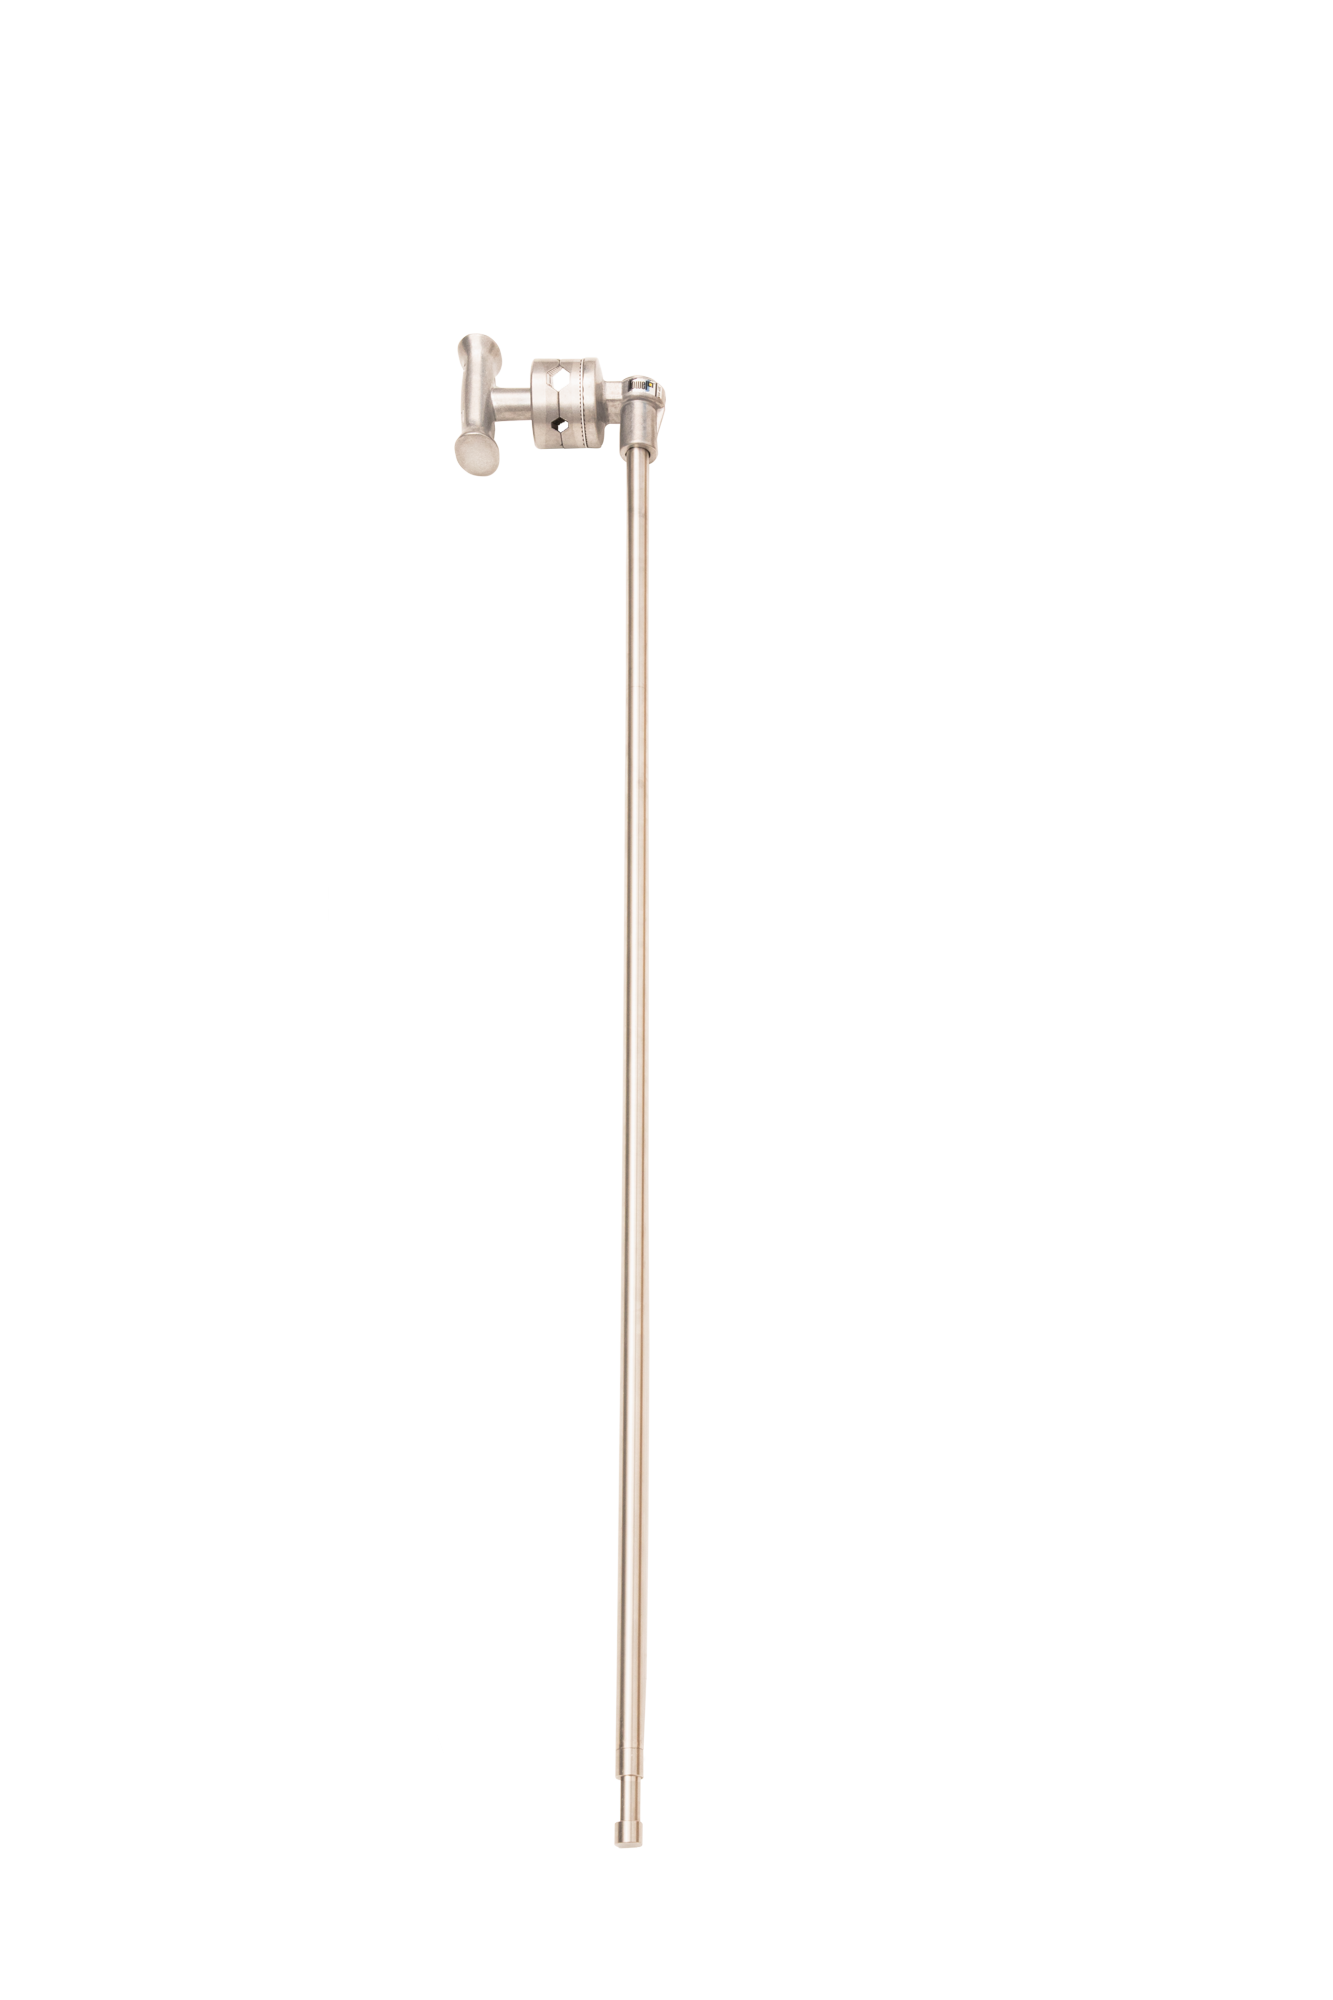 2.5" Grip Arm for C-Stand